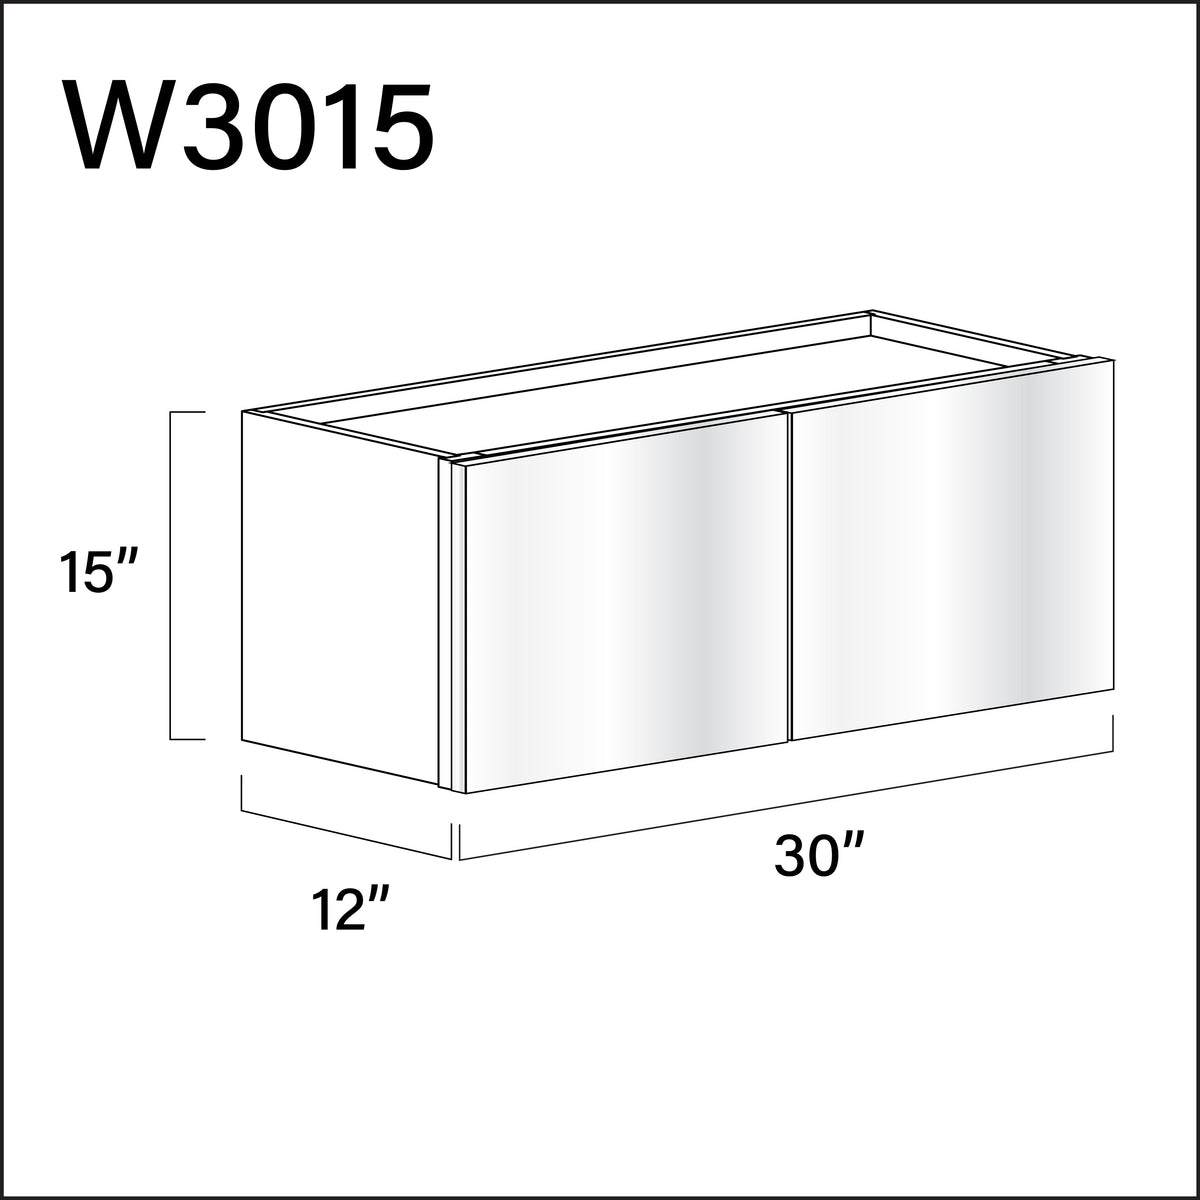 Glossy White Frameless Double Door Wall Cabinet - 30" W x 15" H x 12" D